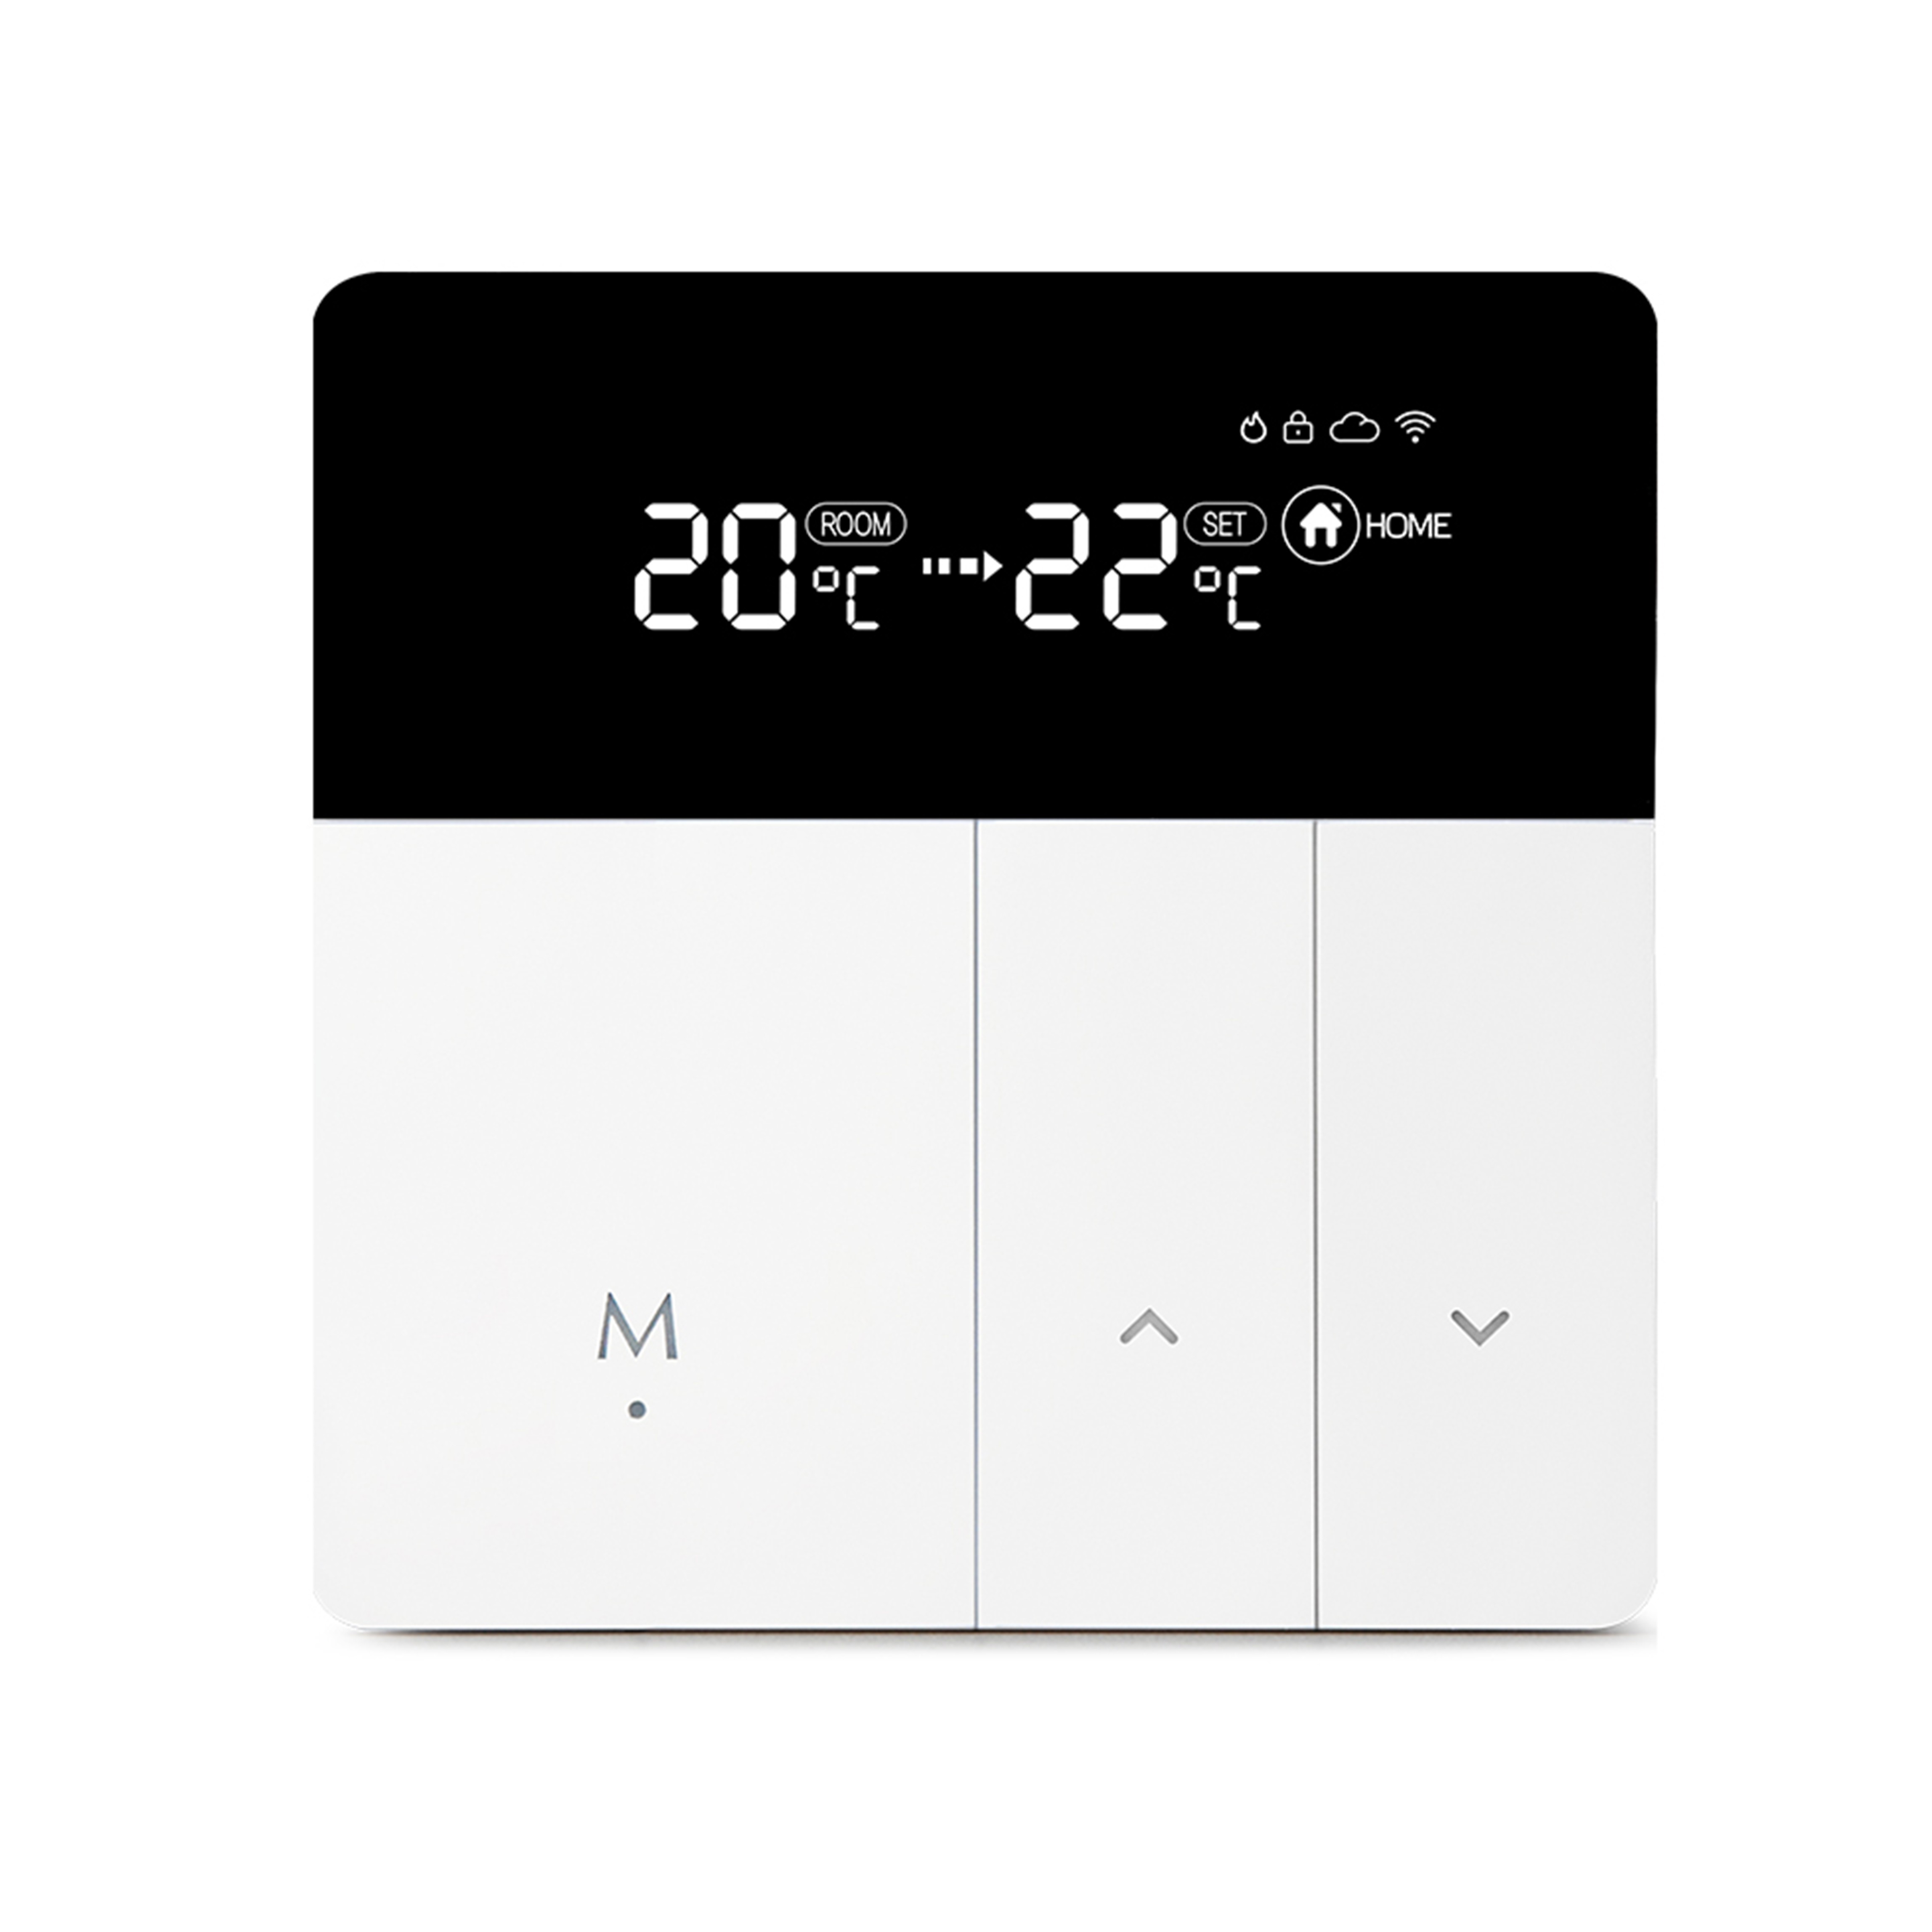 TH113W CN Hydronic Heating Room Smart Digita Constant Temperature Thermostat with WiFi|App|Voice Control